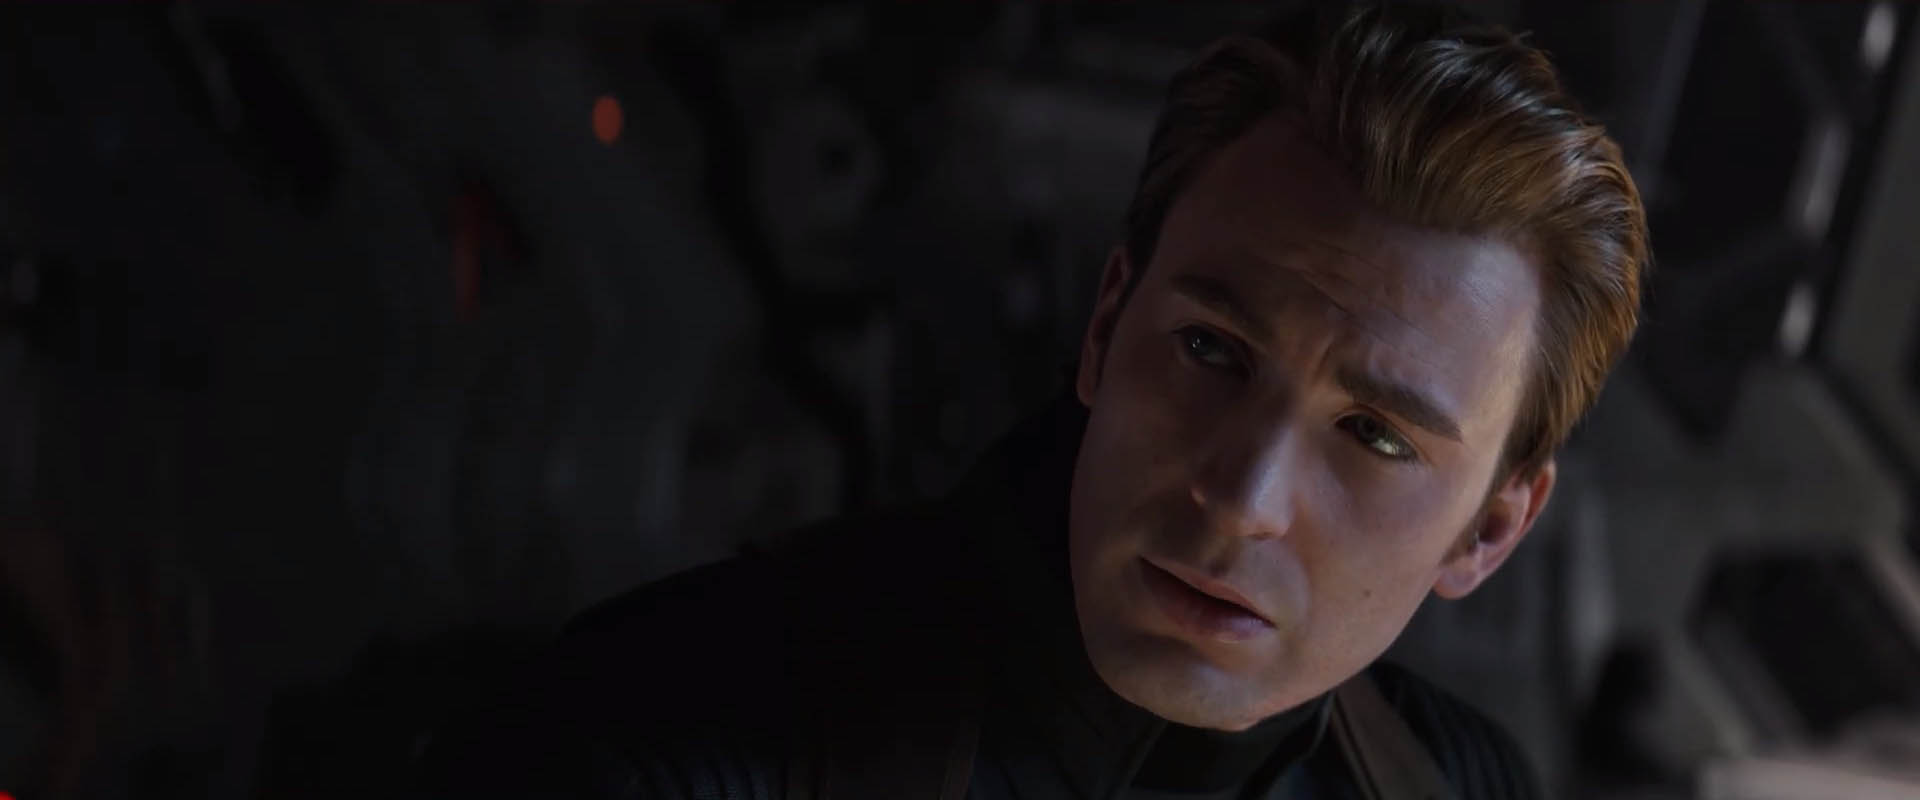 Avengers: Endgame IMAX Trailer Shows Just a Tiny Bit More 